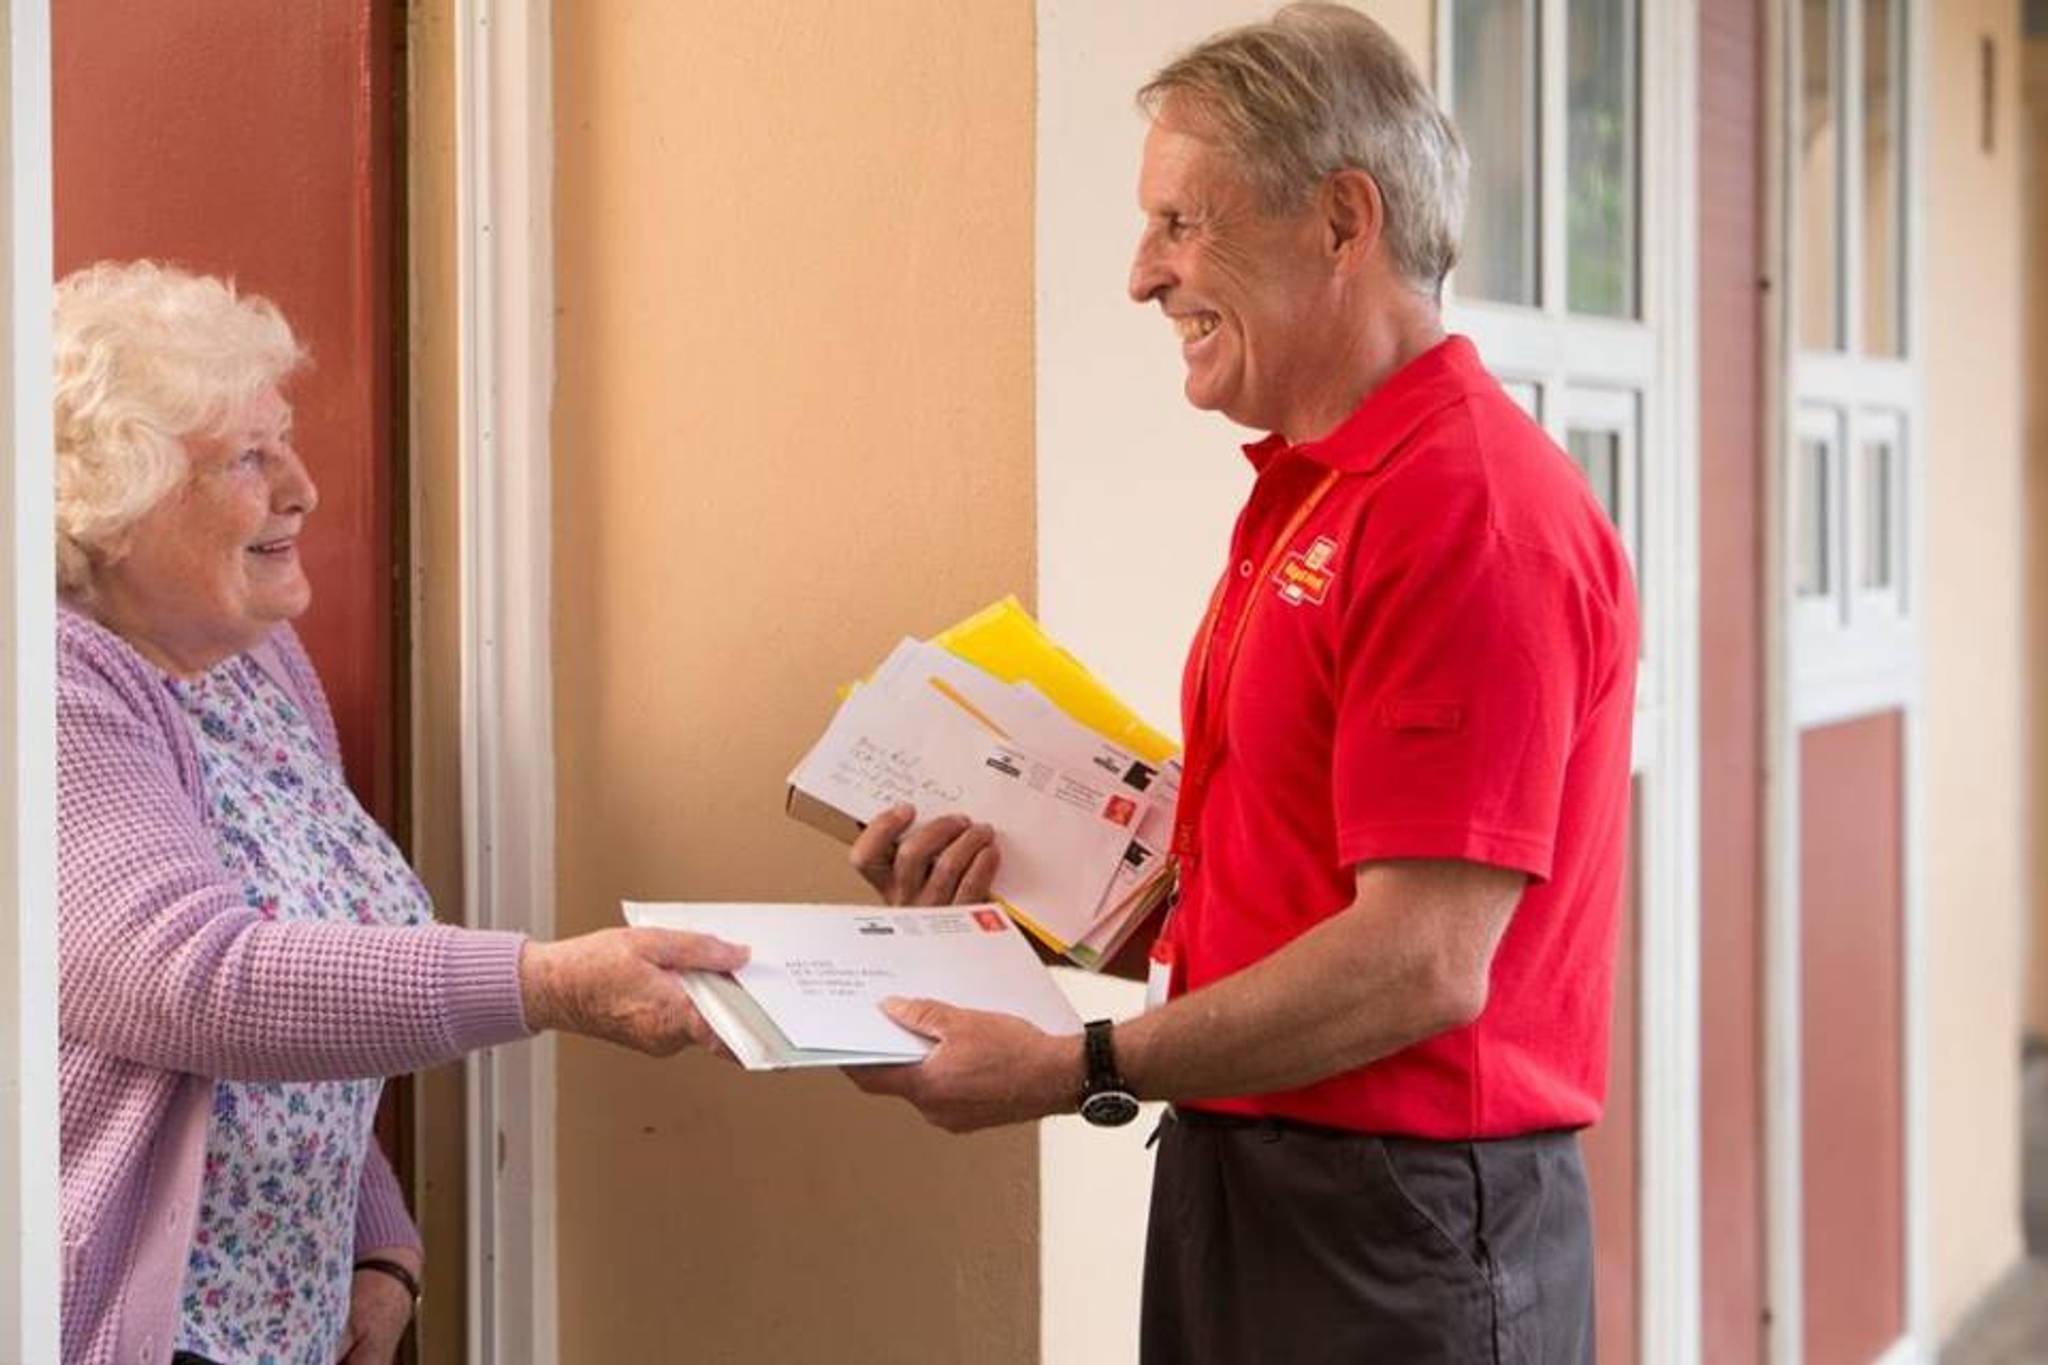 Postal workers check in on Seniors to tackle loneliness